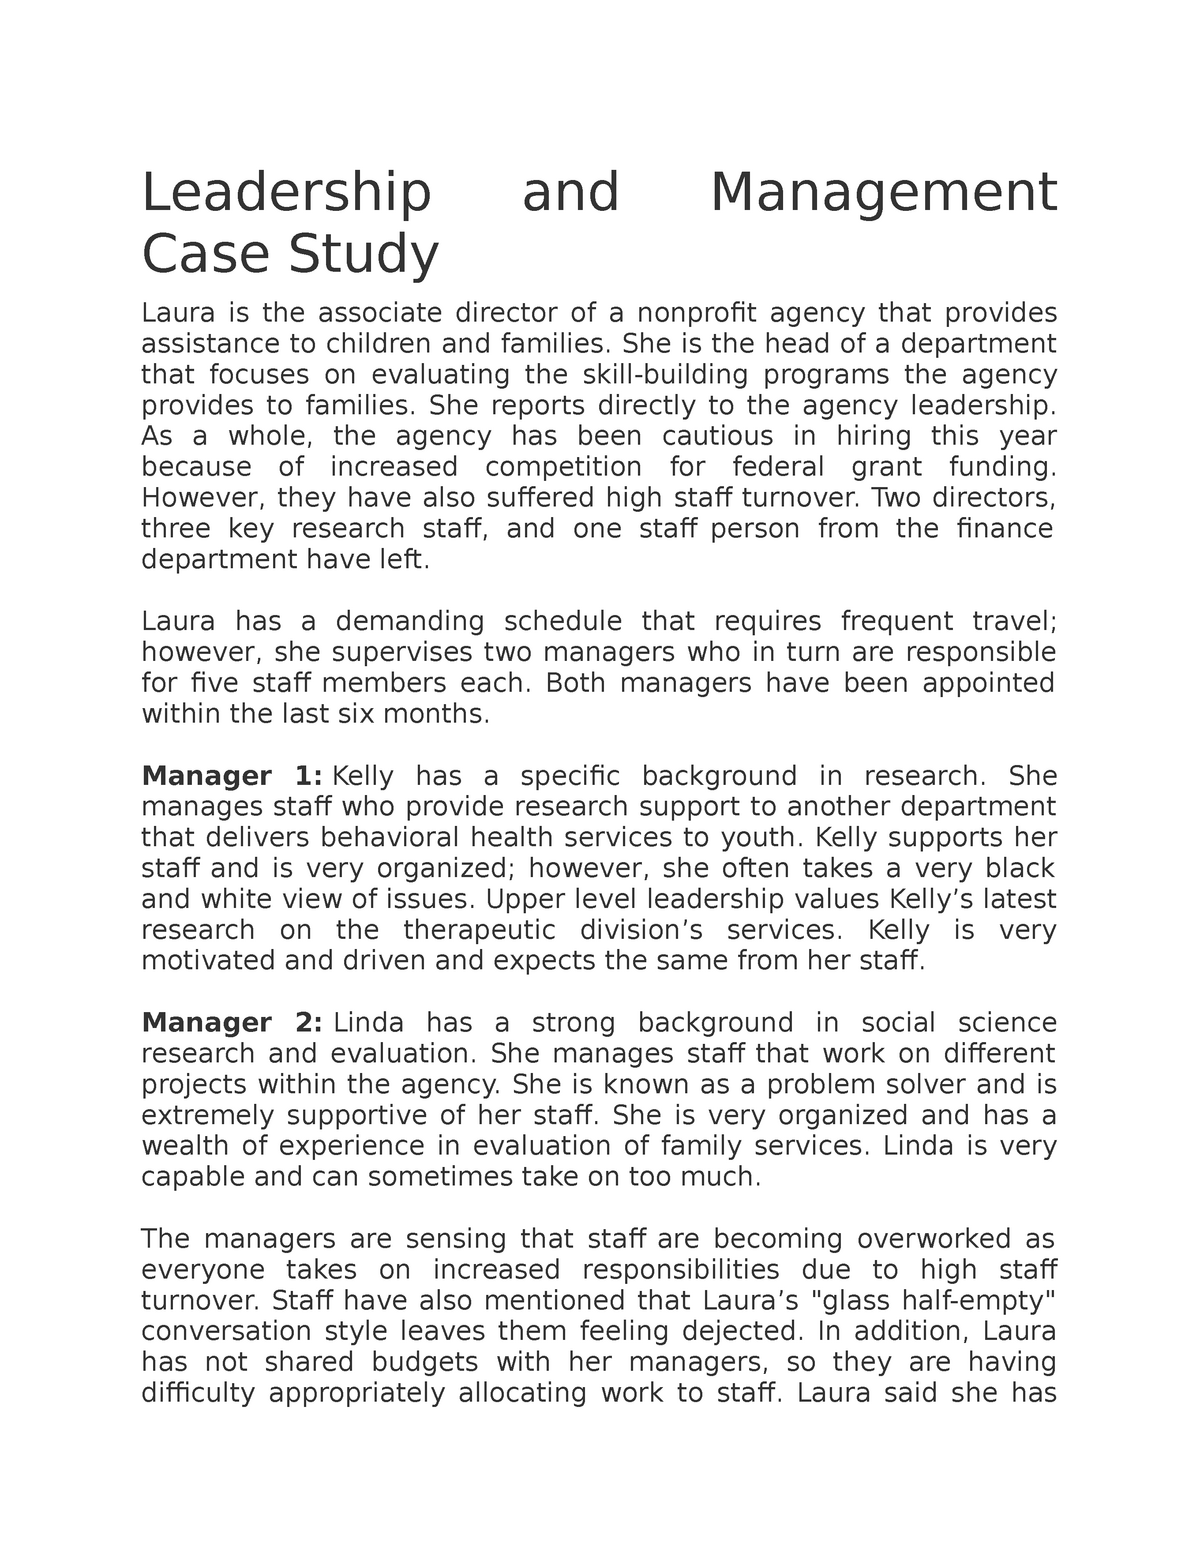 leadership and management case study laura